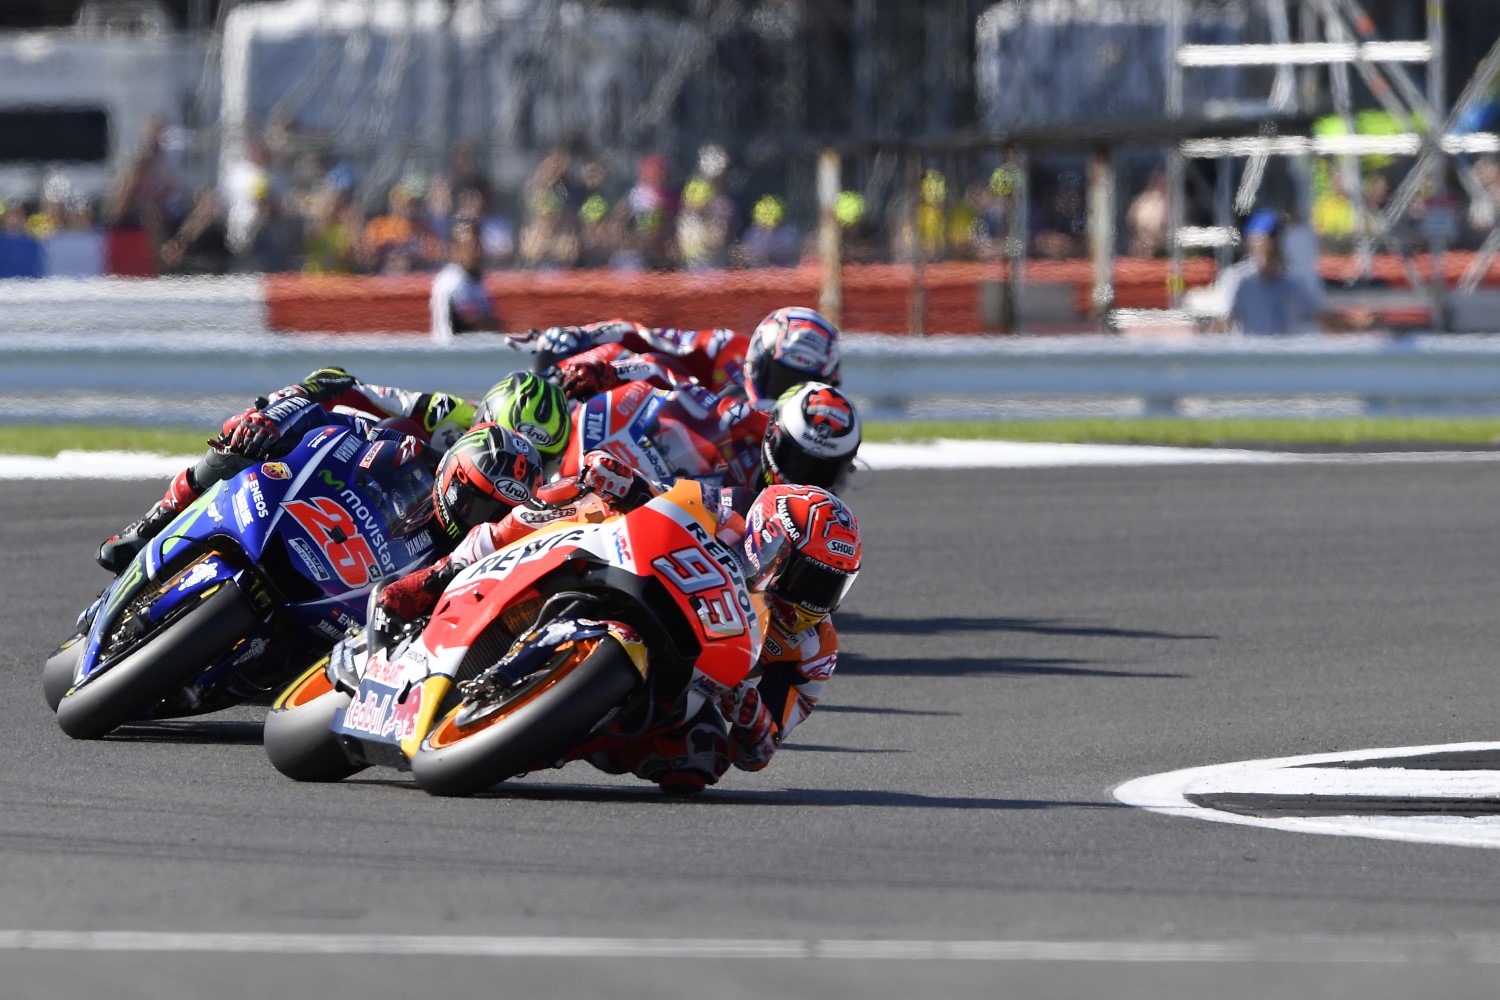 Marquez at Silverstone